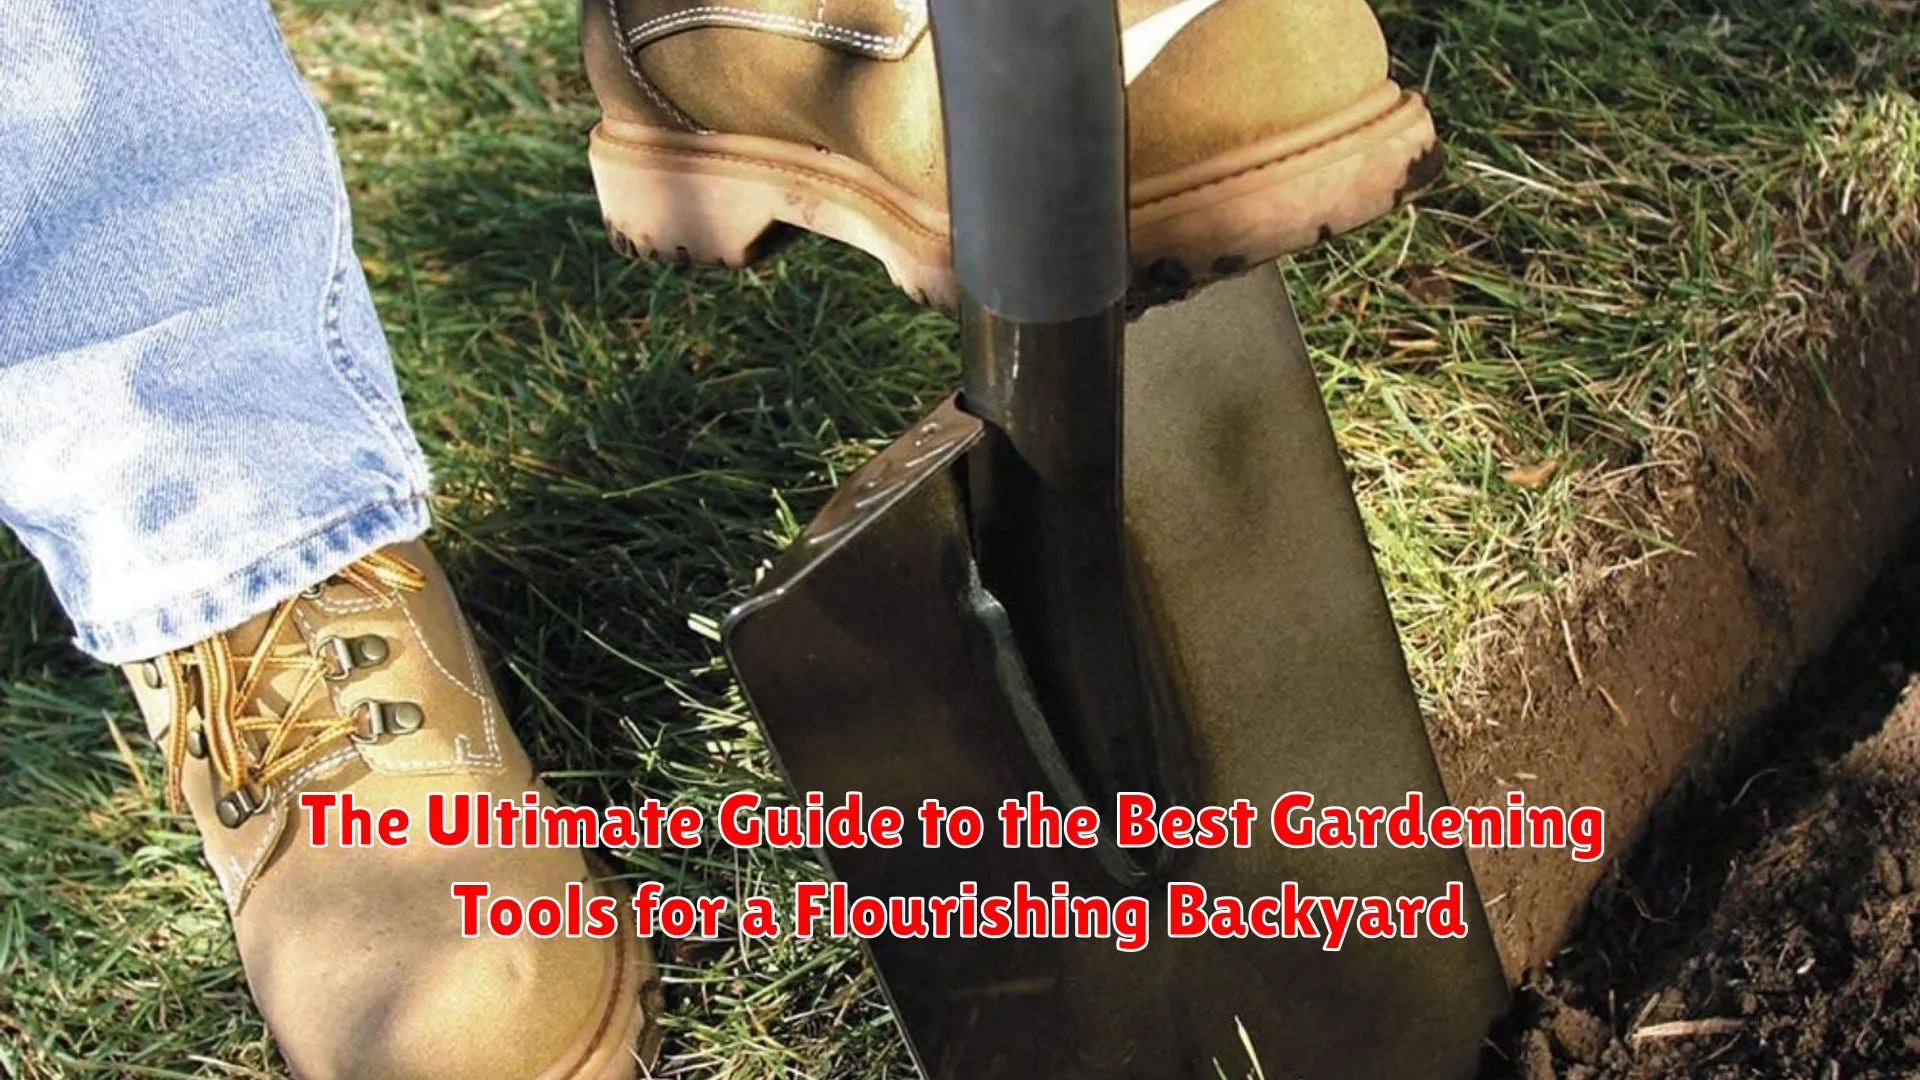 The Ultimate Guide to the Best Gardening Tools for a Flourishing Backyard